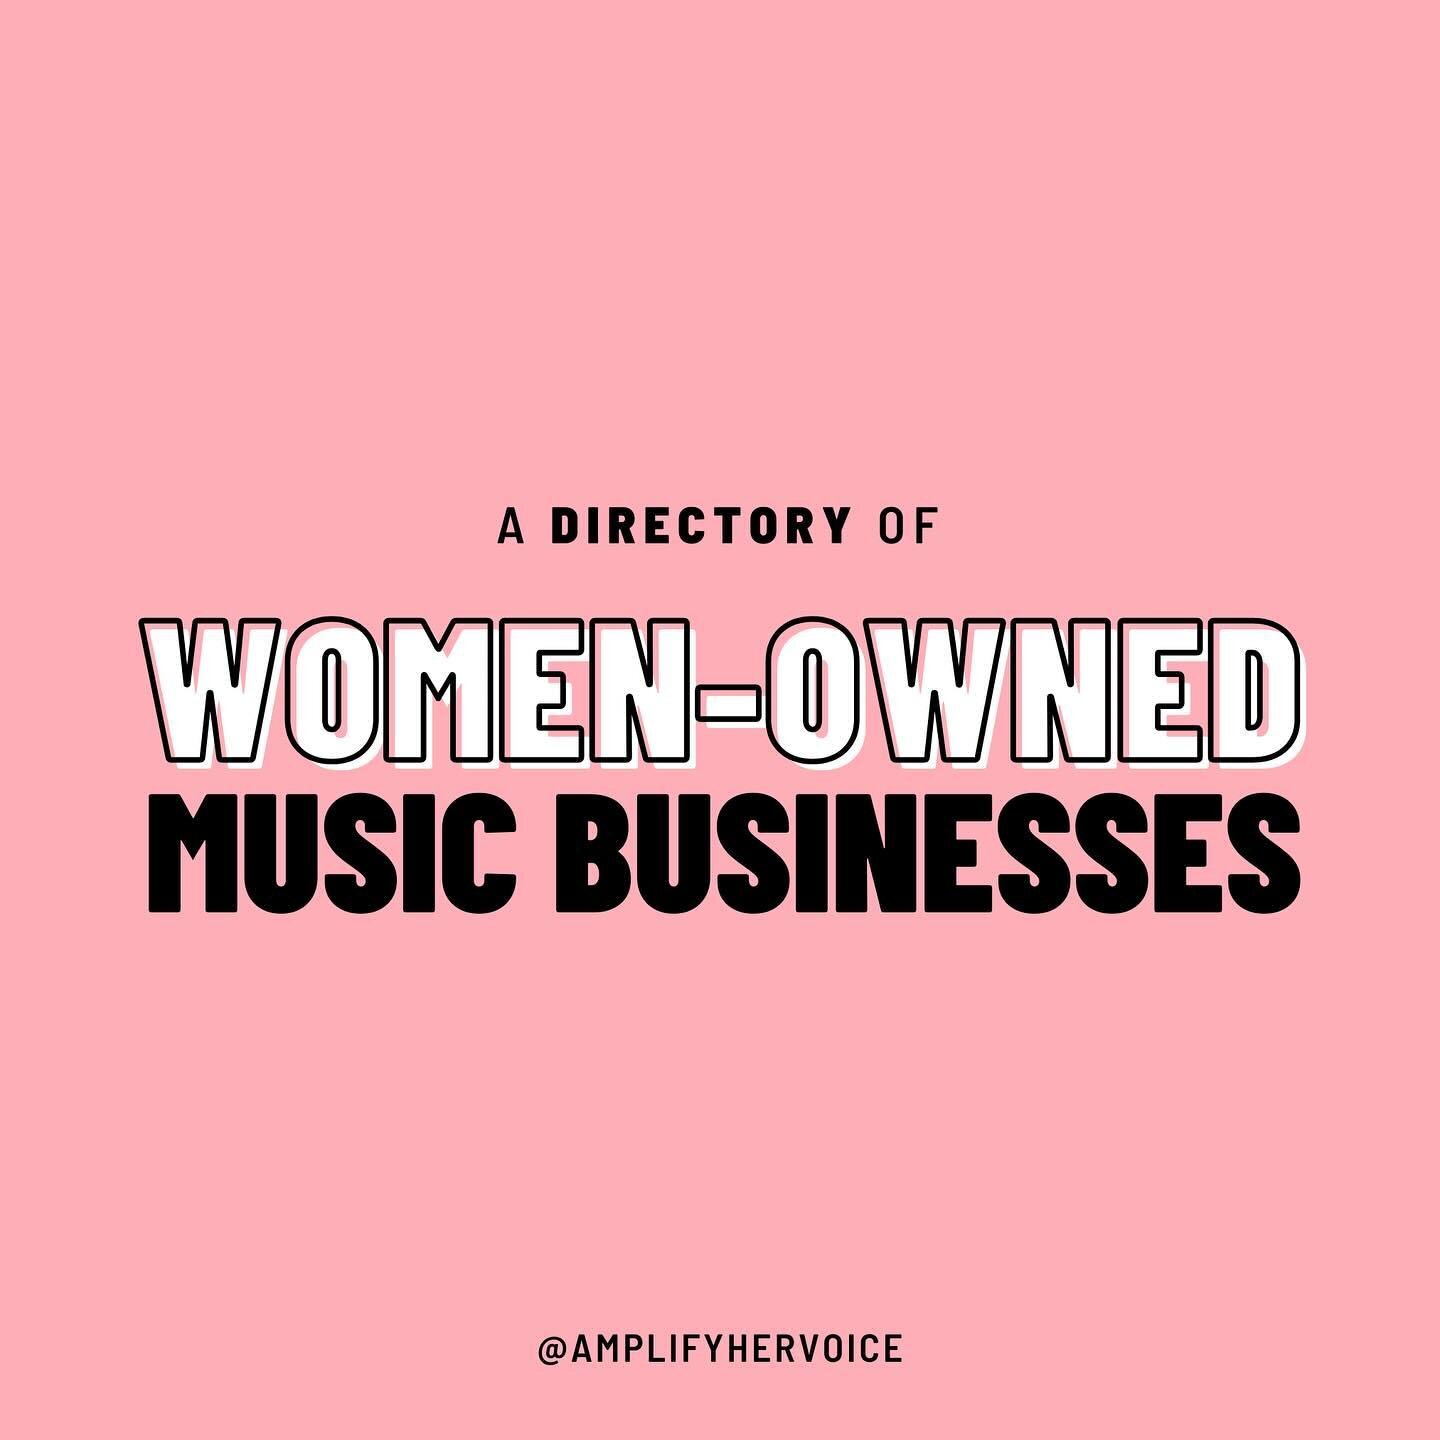 Invest in women. Pay women. Hire women. What women-owned businesses should we feature next?